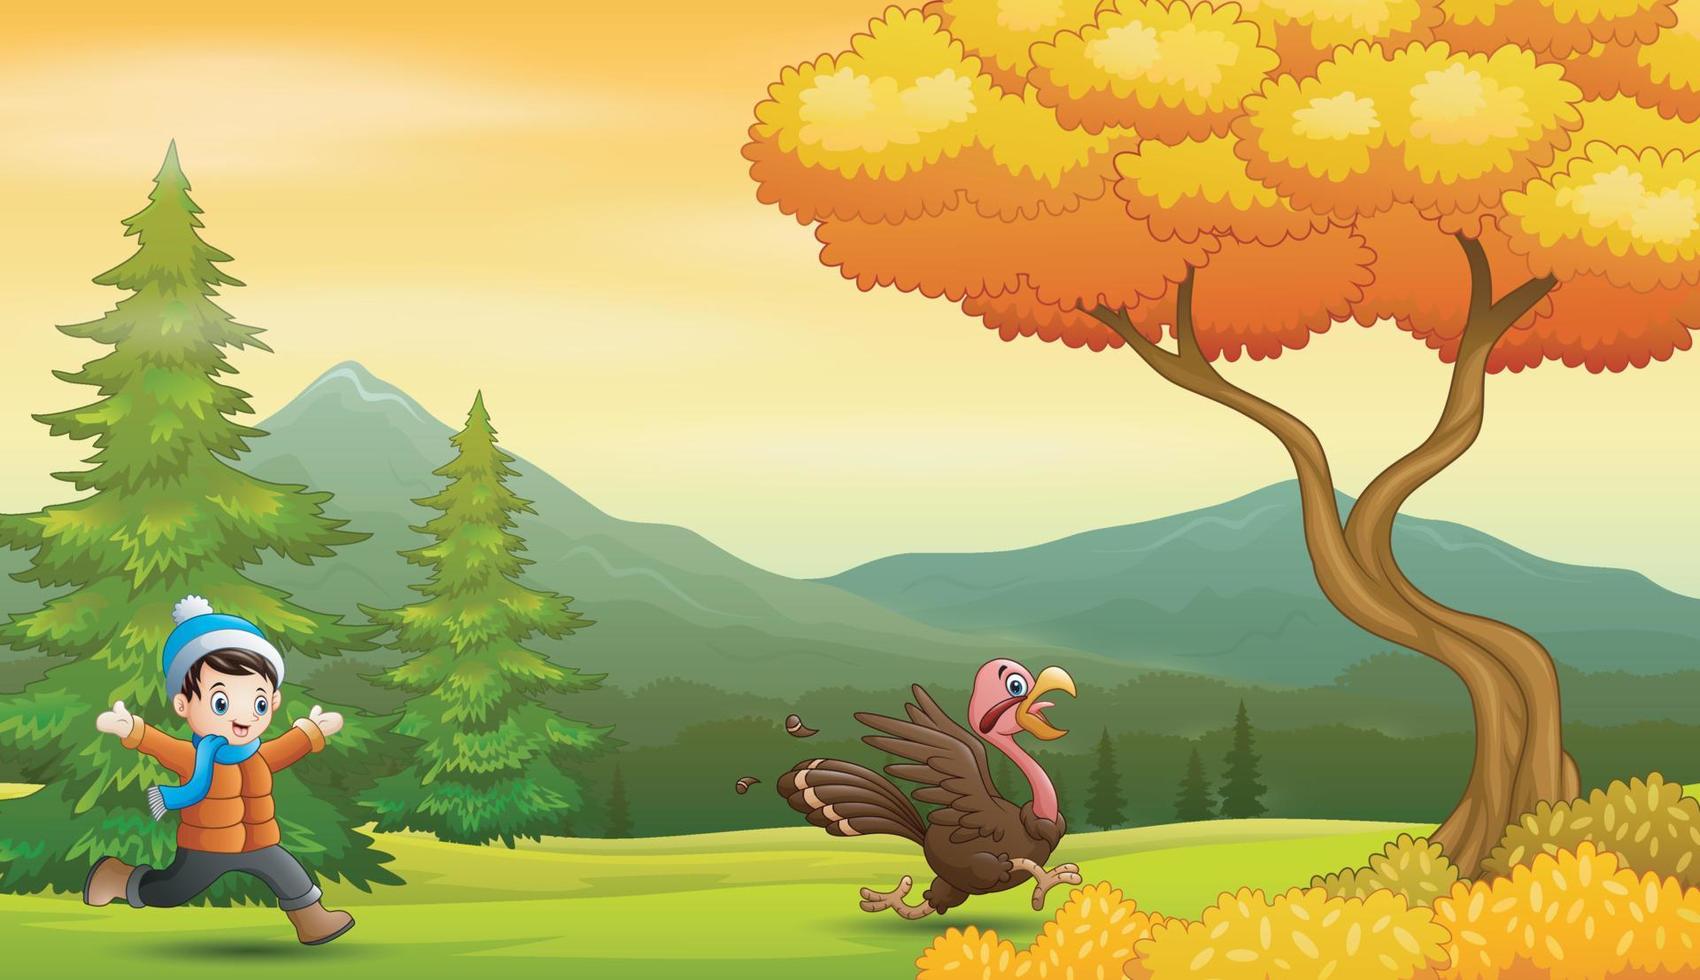 Boy chasing a turkey in the nature landscape vector